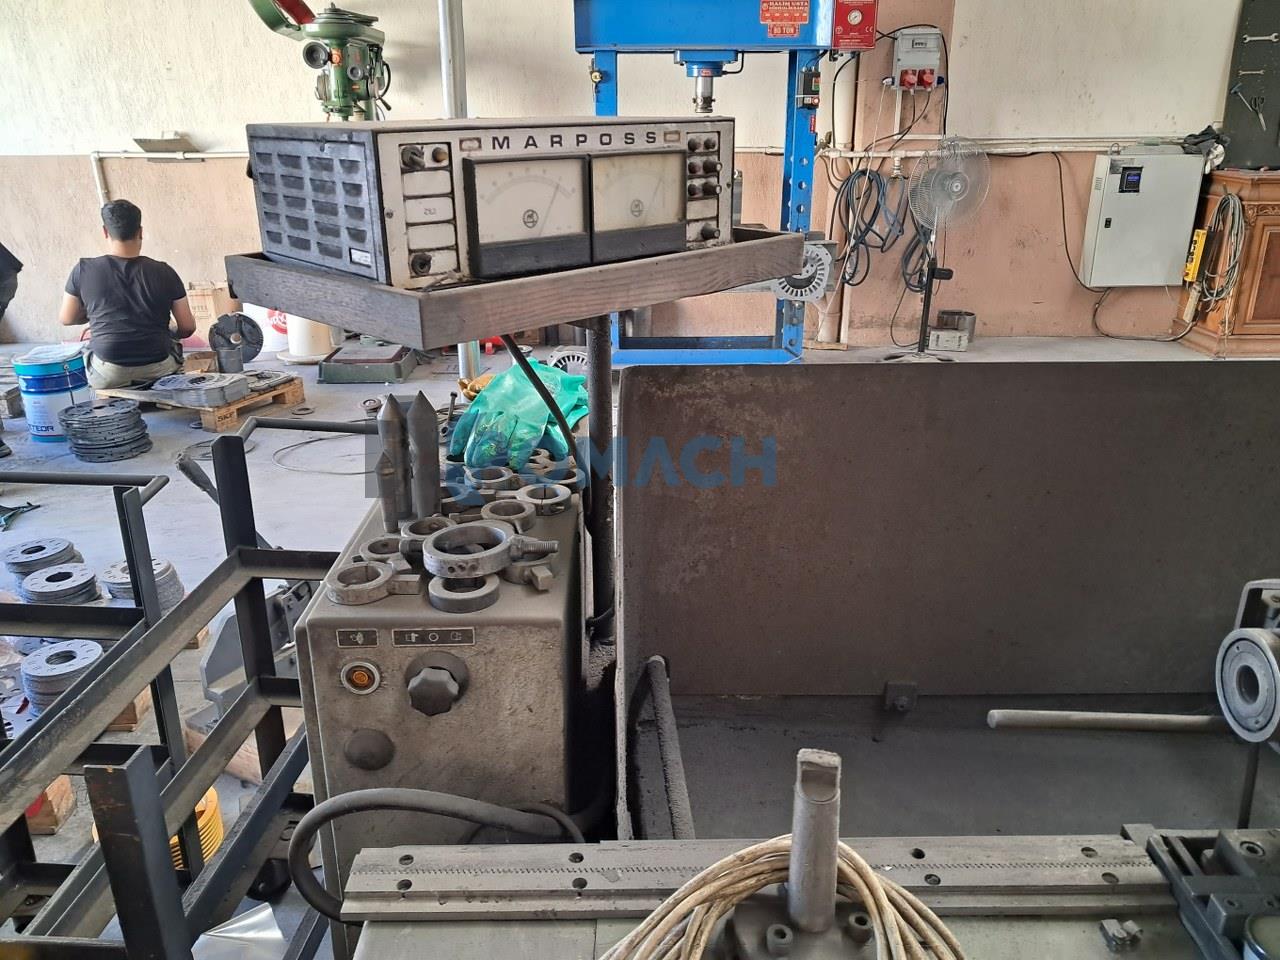 Cylinder Grinding Machine, Karstens Brand, Diameter 400, Length 800, With Hole Apparatus